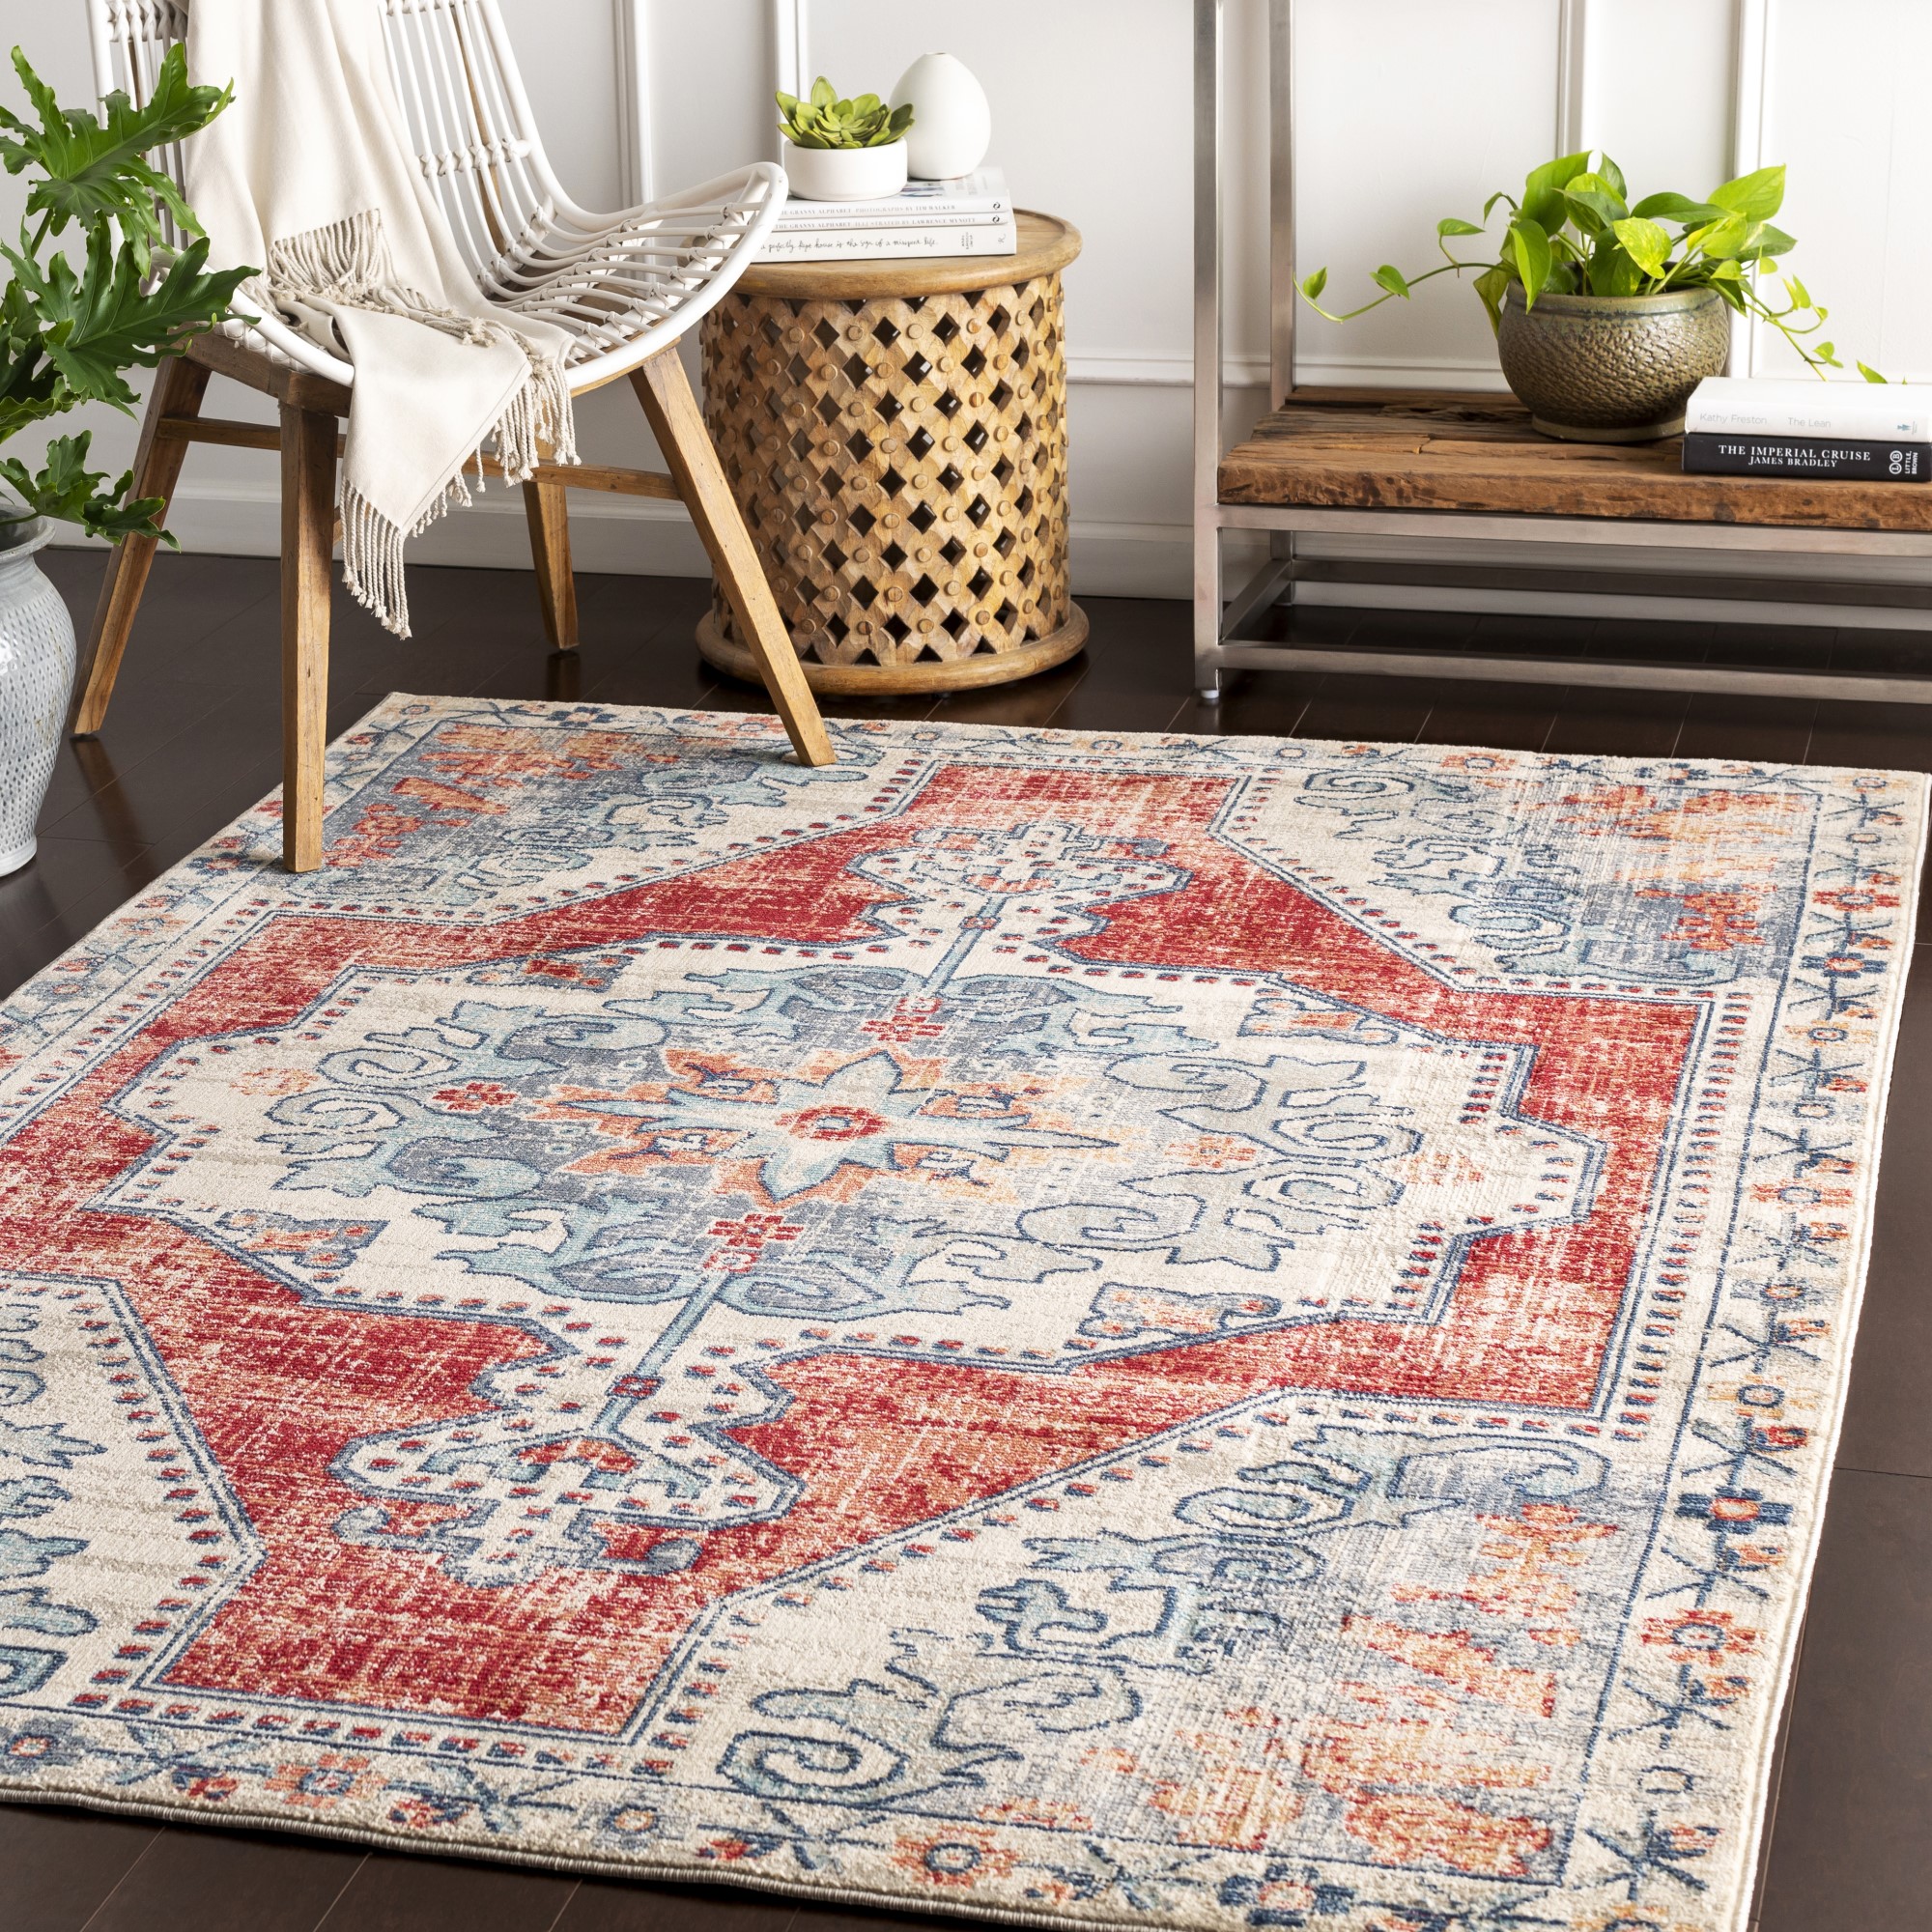 Boho Rugs 8X10 / Best selling 8x10 large area rugs under $50, $100 and